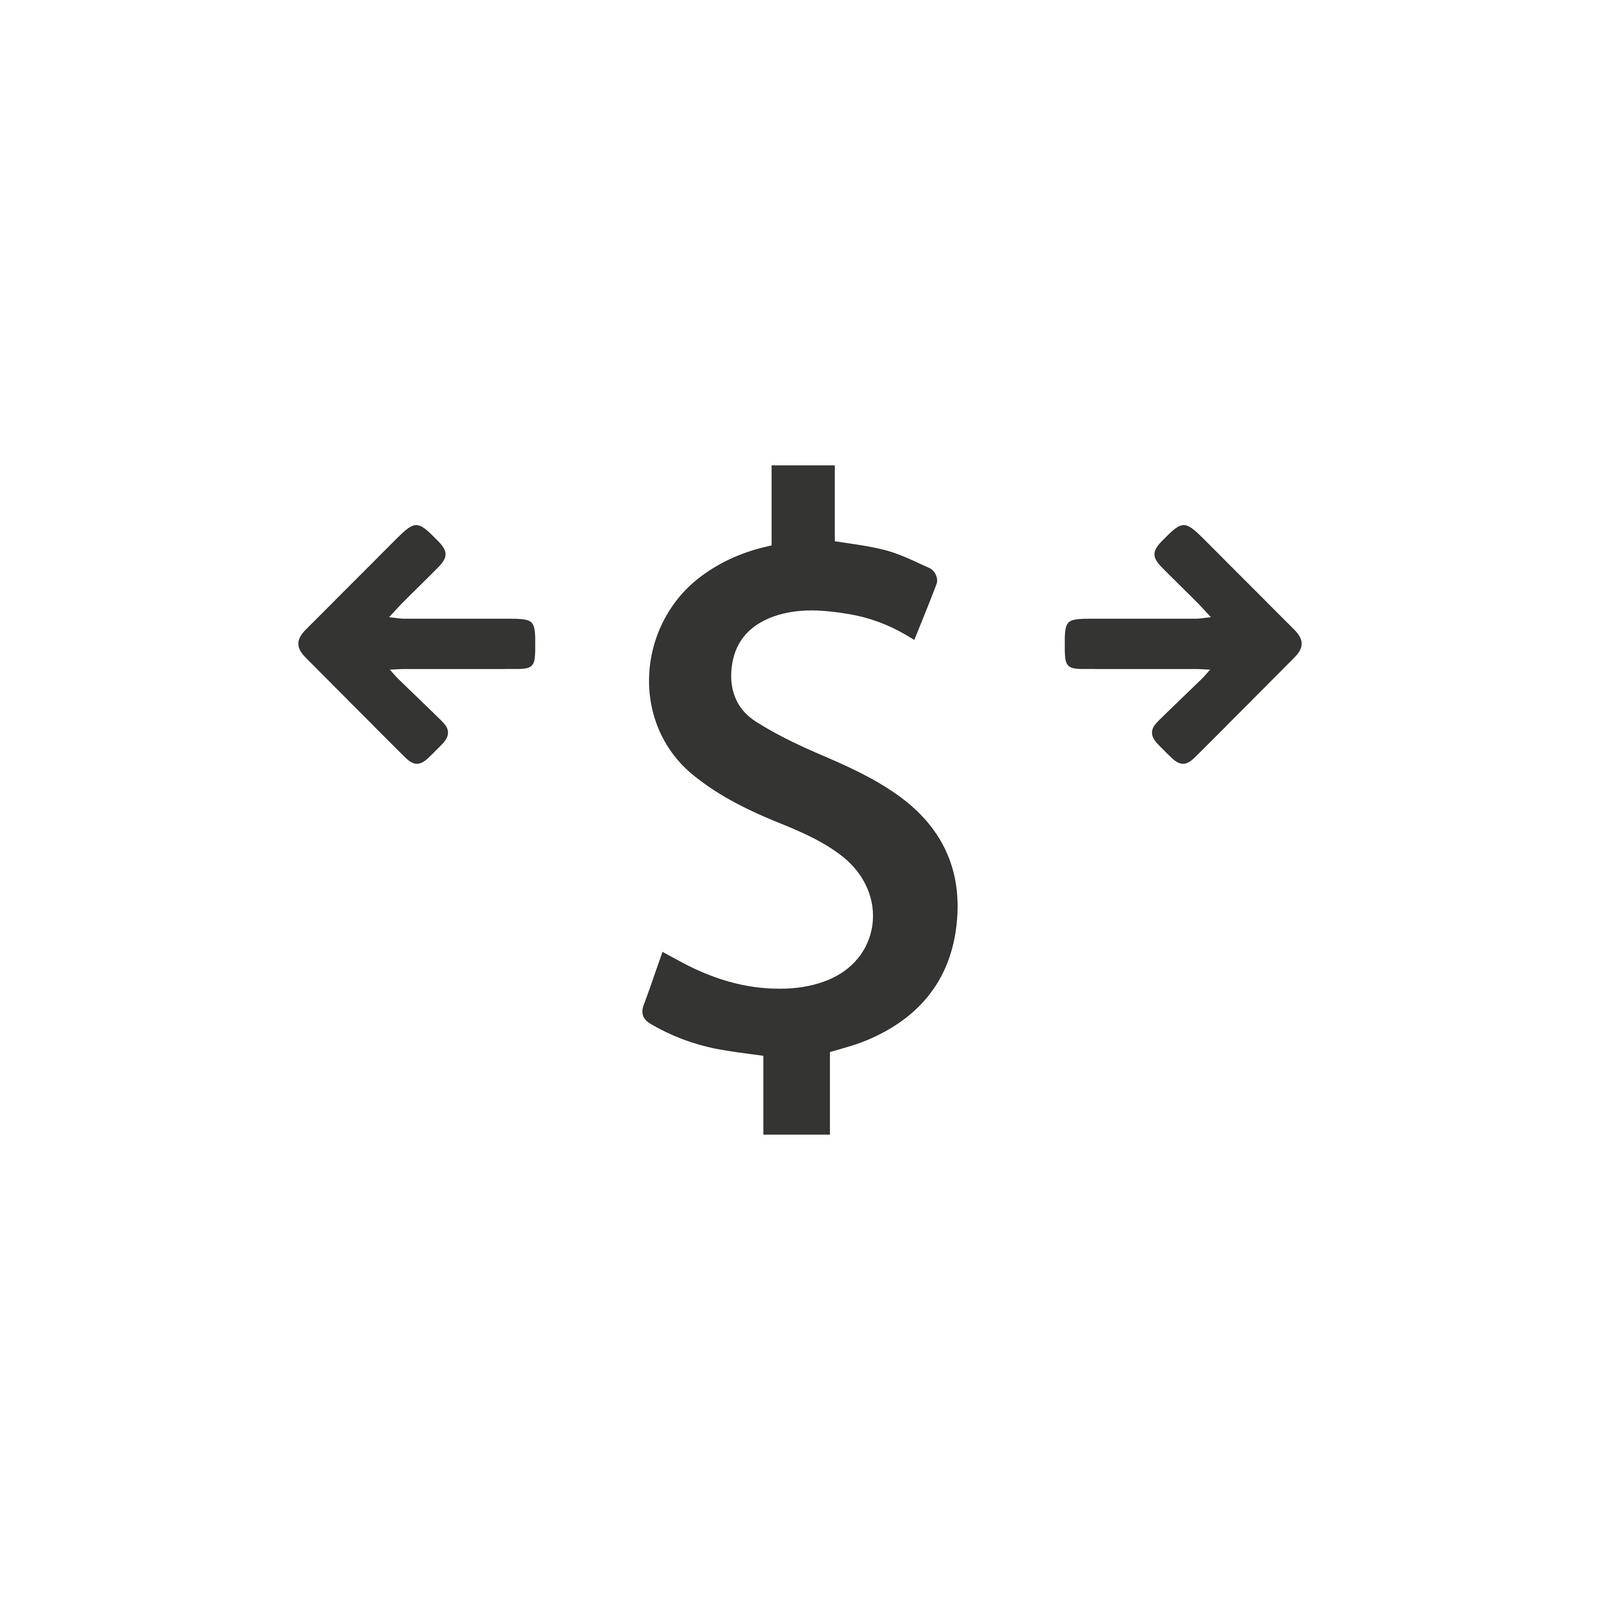 Business Direction icon. Vector EPS file.